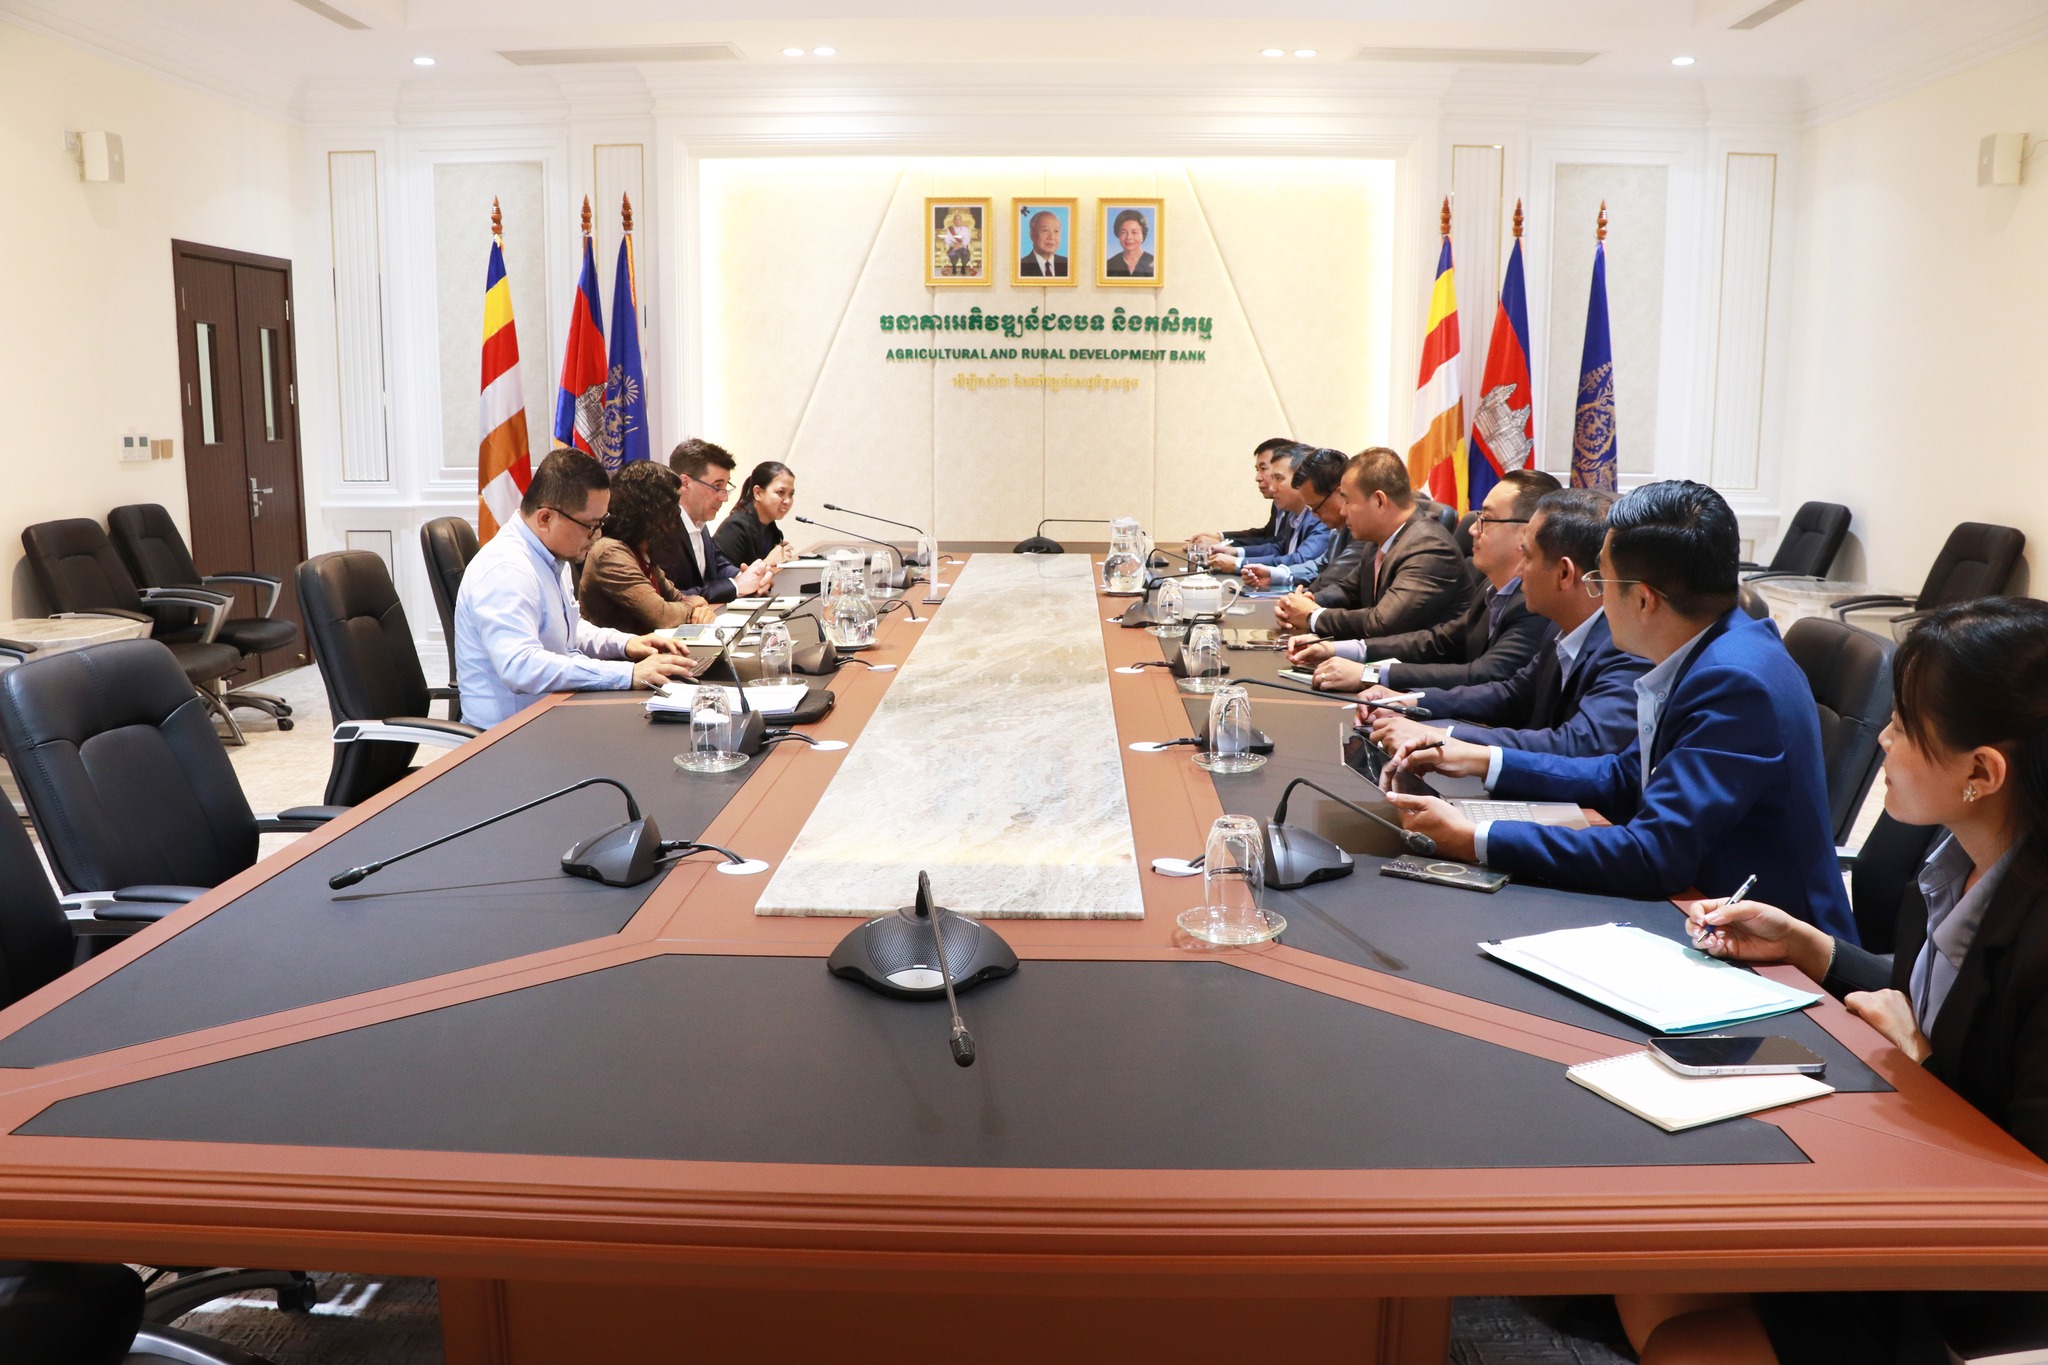 H.E. Dr. KAO Thach, accompanied by his colleagues, met with the representatives of Asian Development Bank (ADB)